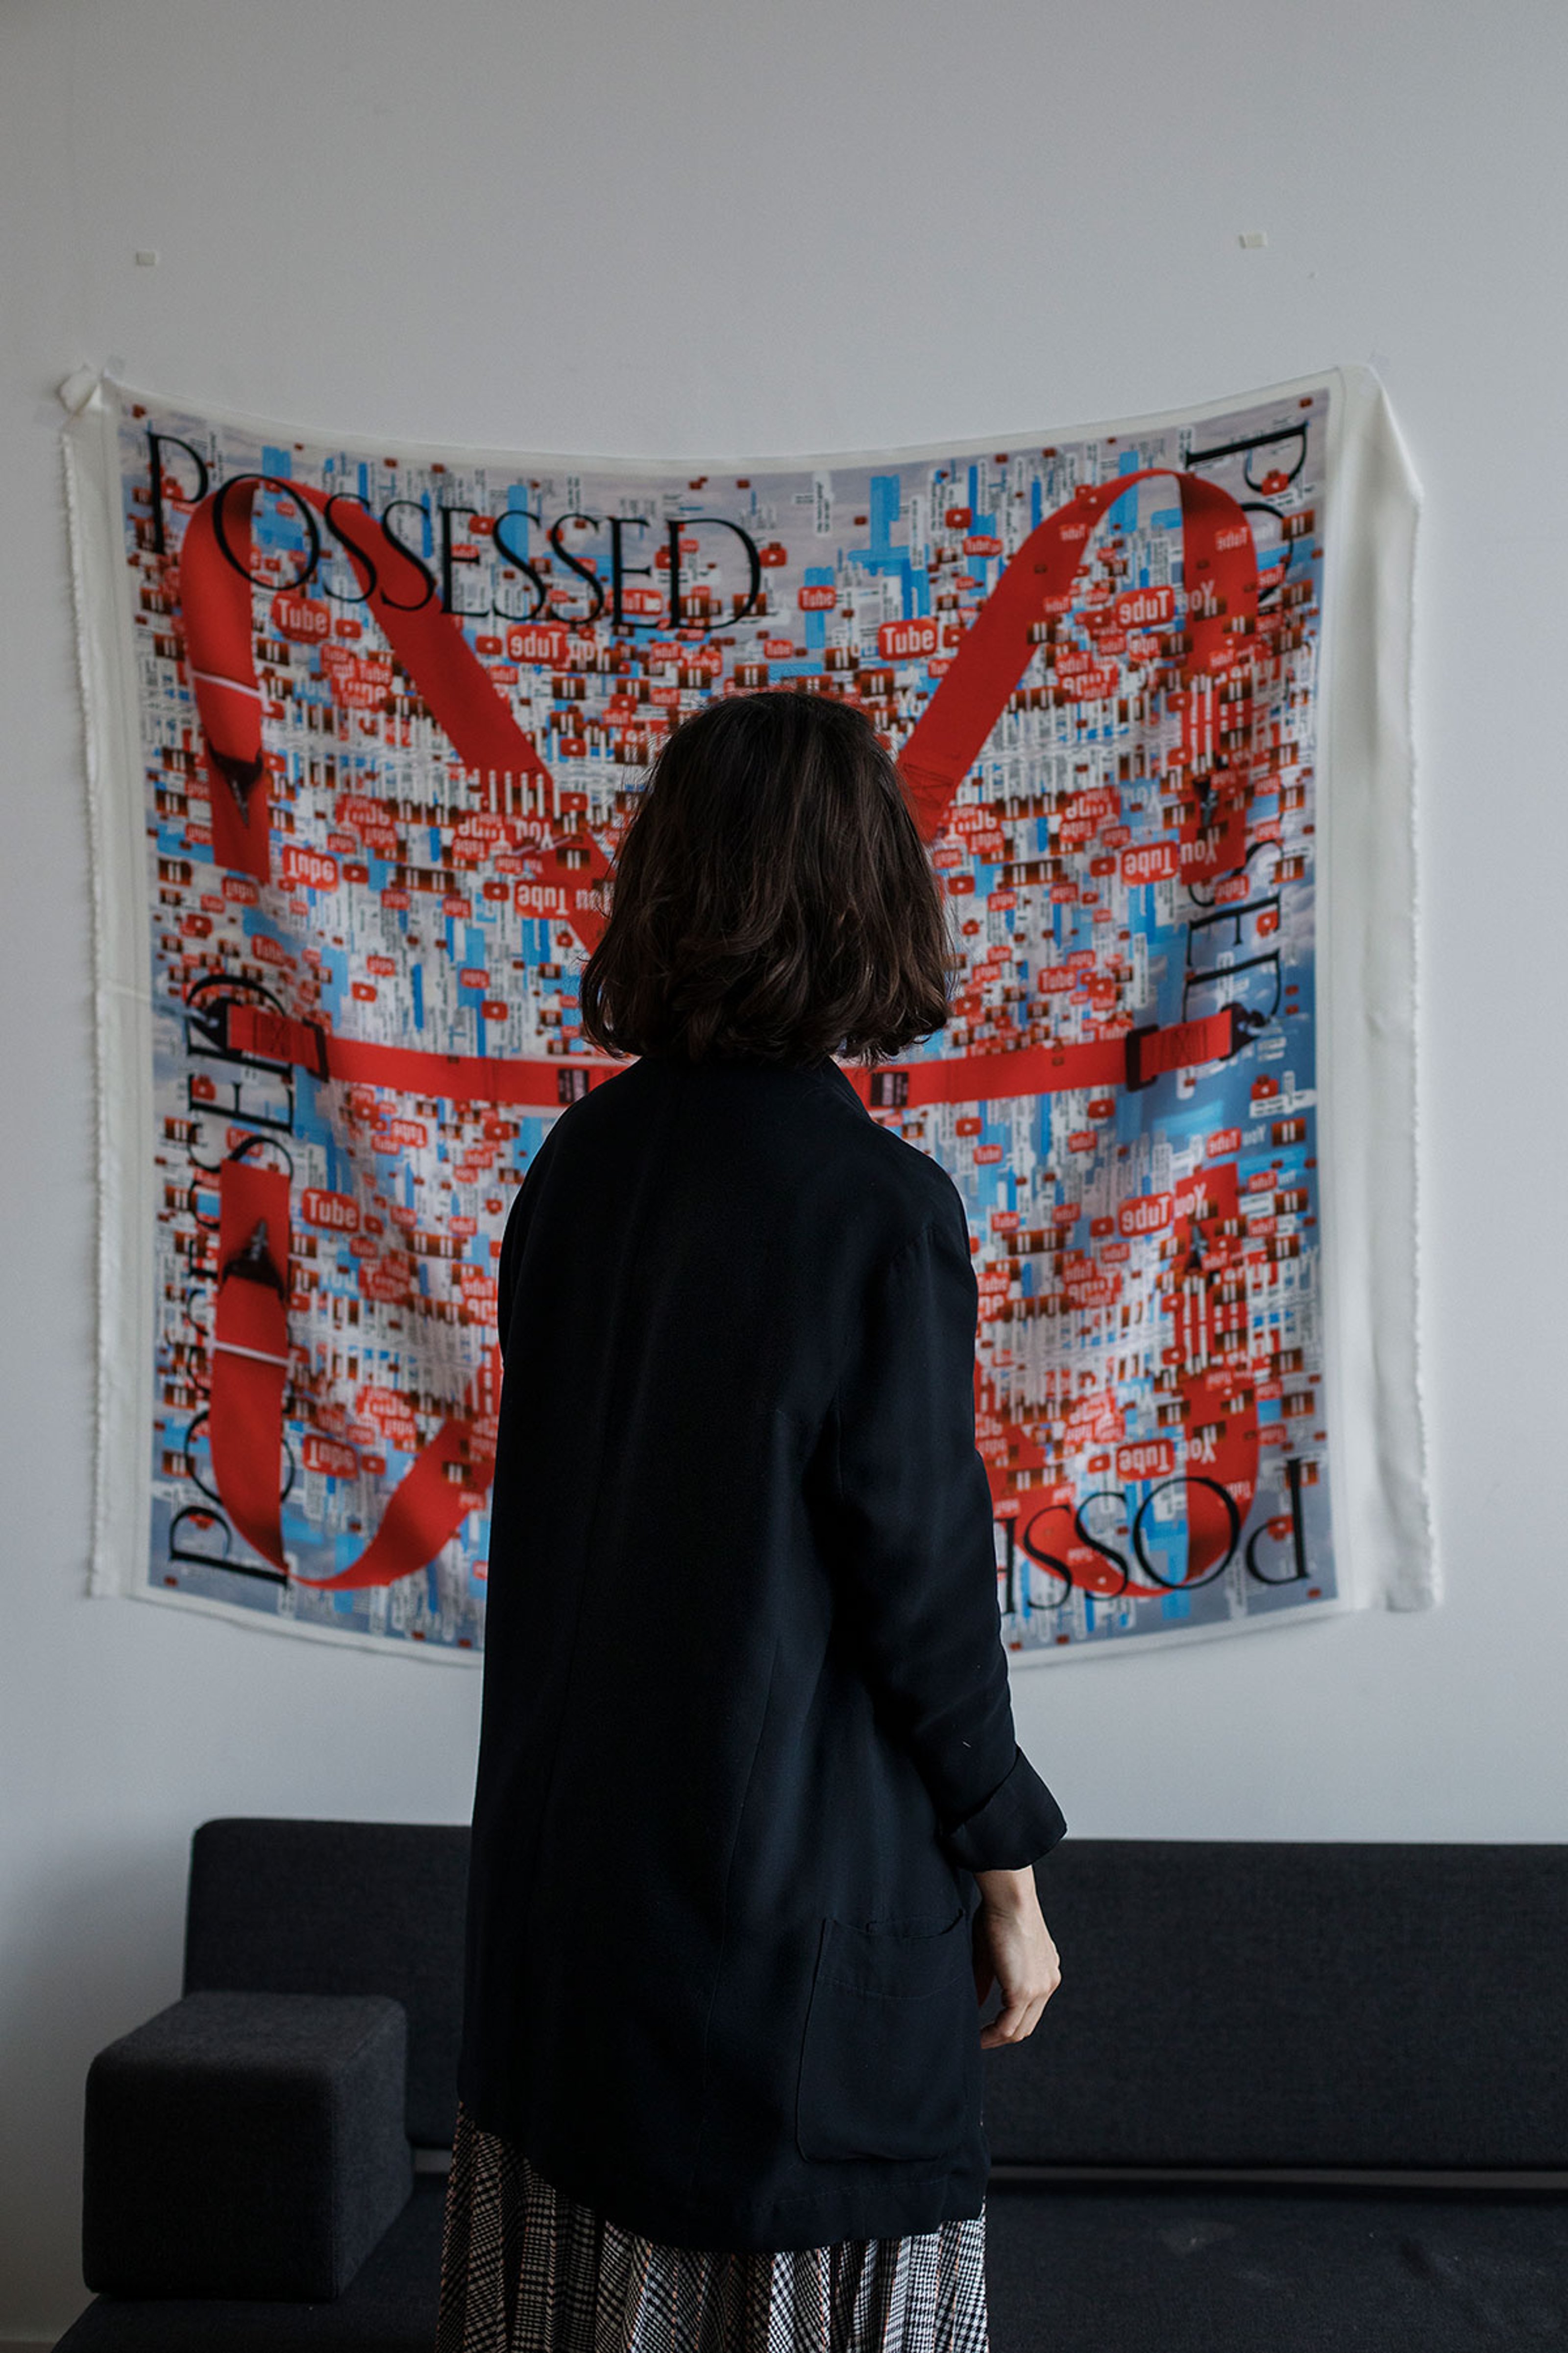 A woman looking at a tapestry on the wall which is an artwork by metahaven